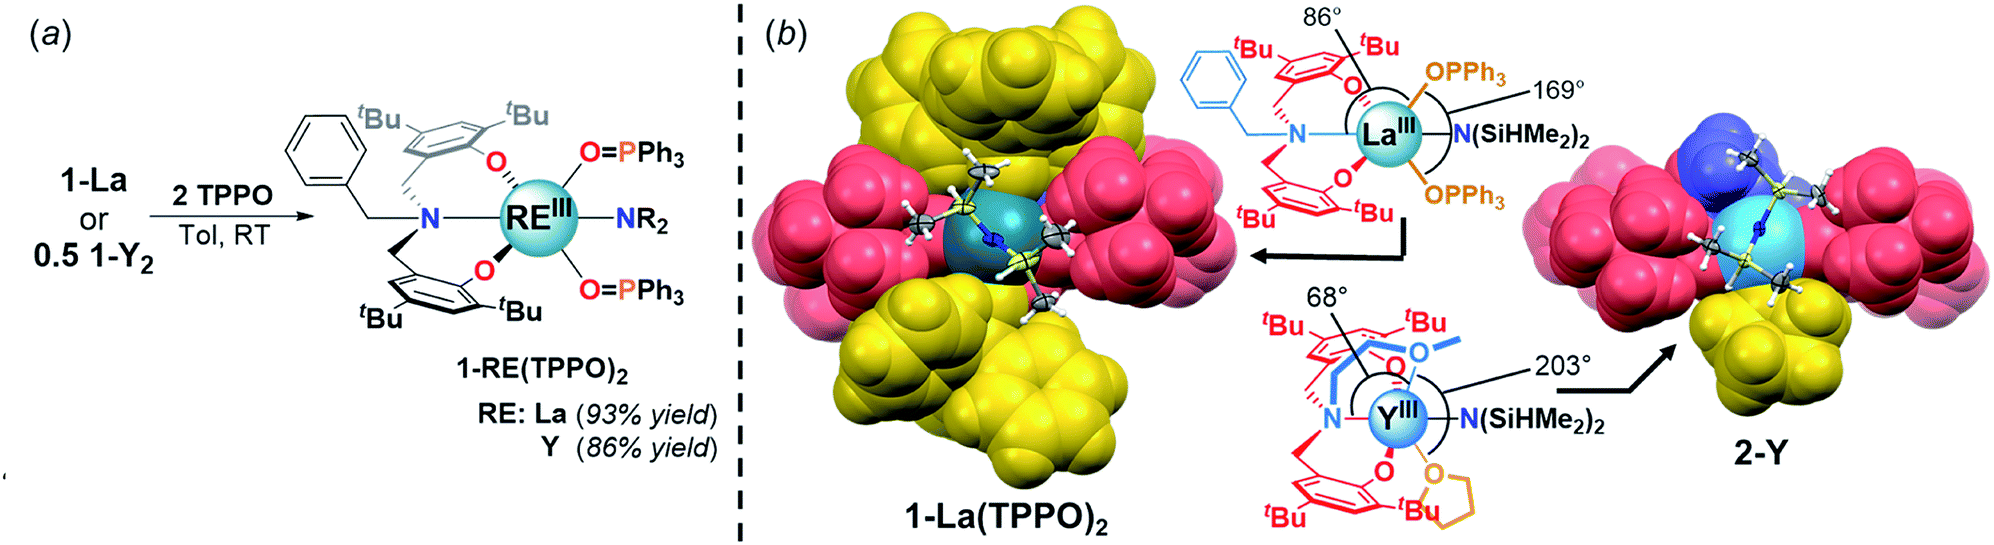 The Role Of Neutral Donor Ligands In The Isoselective Ring Opening Polymerization Of Rac B Butyrolactone Chemical Science Rsc Publishing Doi 10 1039 D0scf